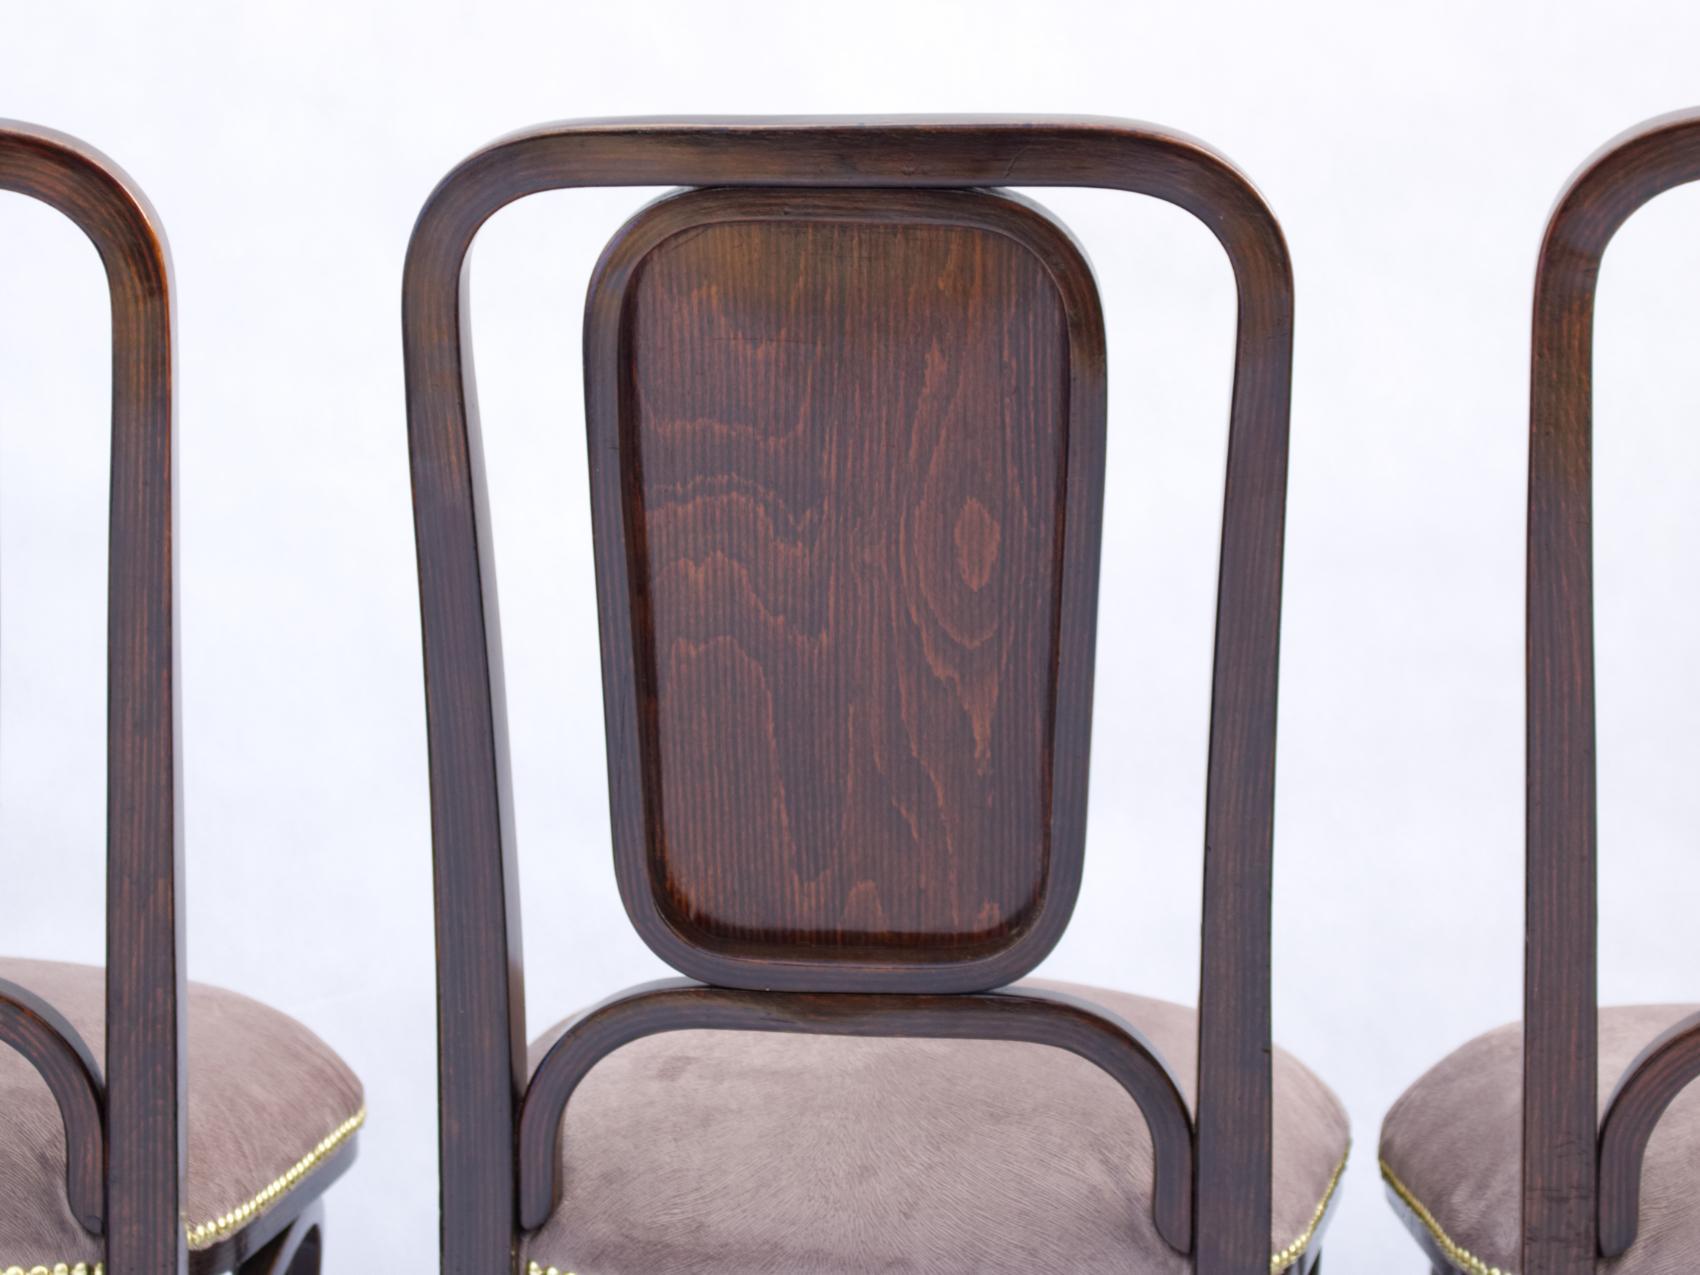 Vienna Secession Art Noveau Bentwood Chairs, Early 20th Century, Circa 1905 For Sale